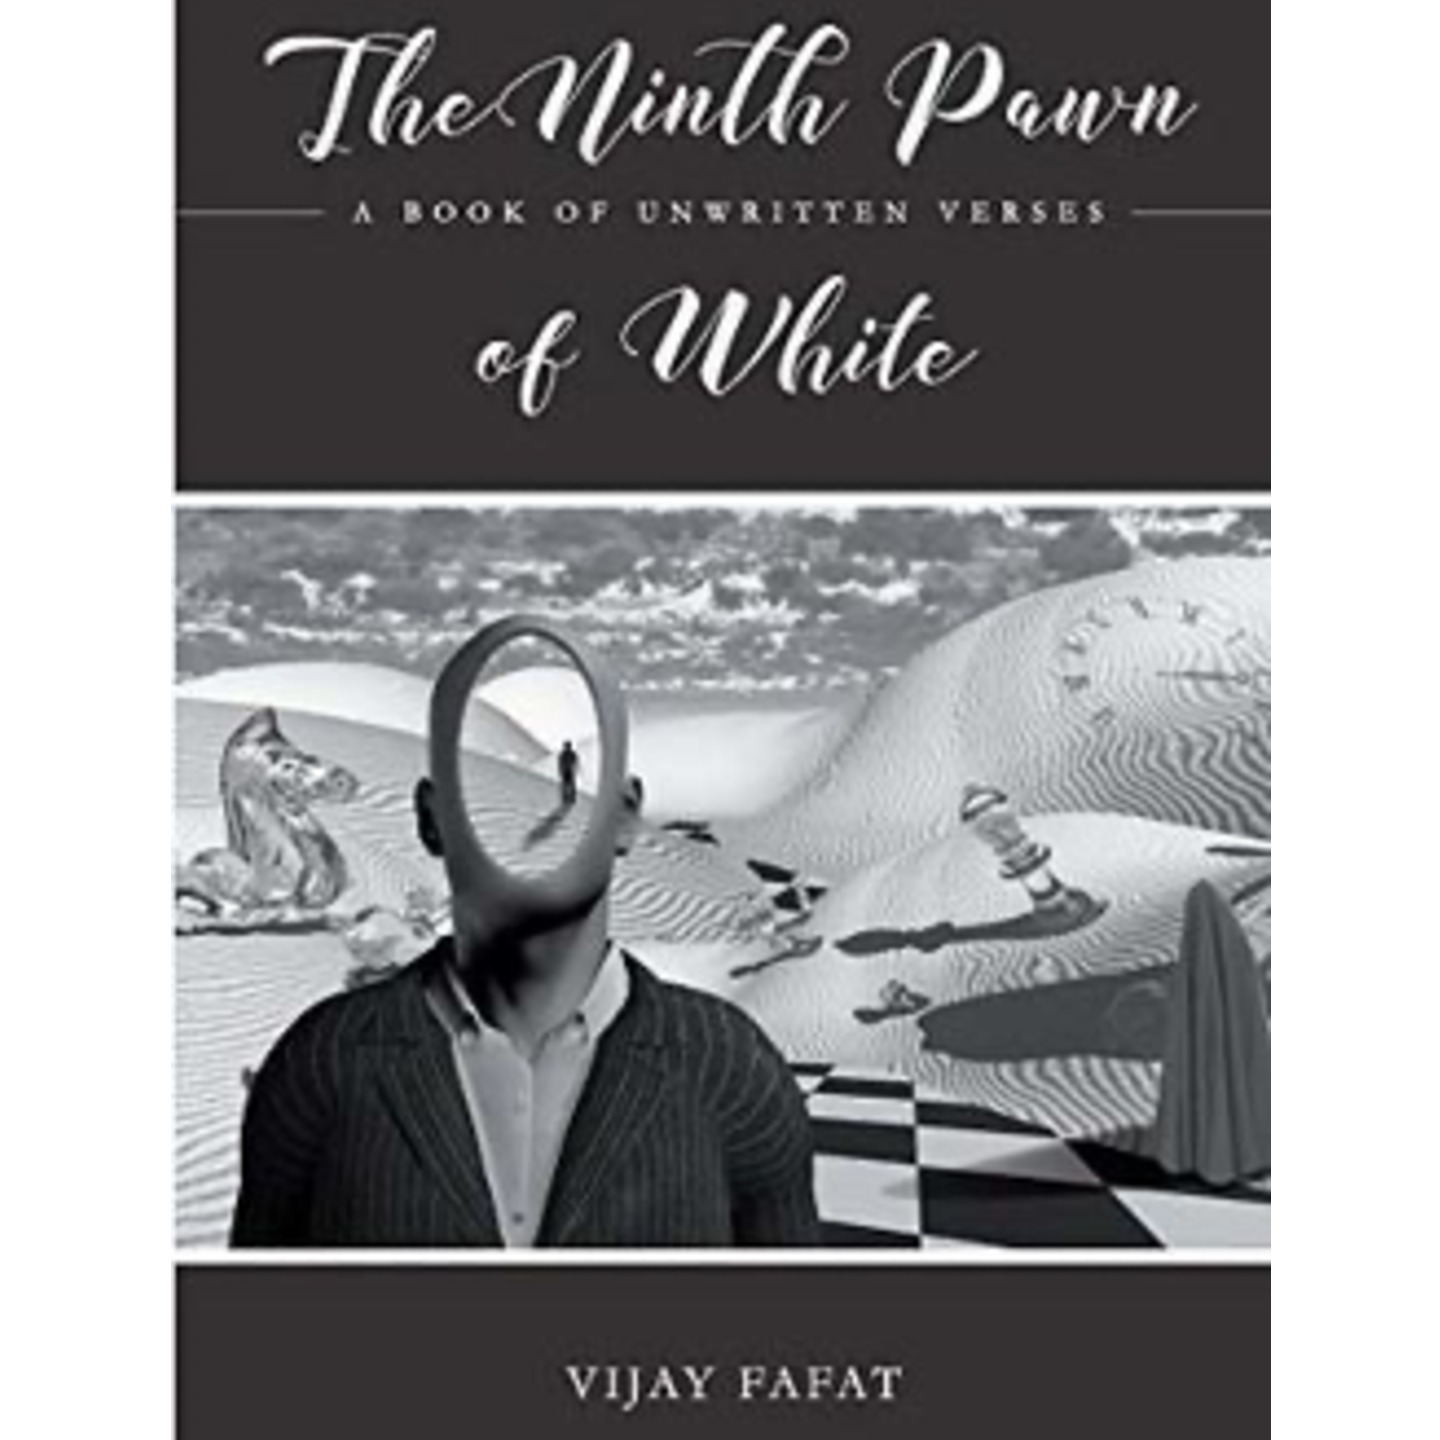 The Ninth Pawn of White by Vijay Fafat